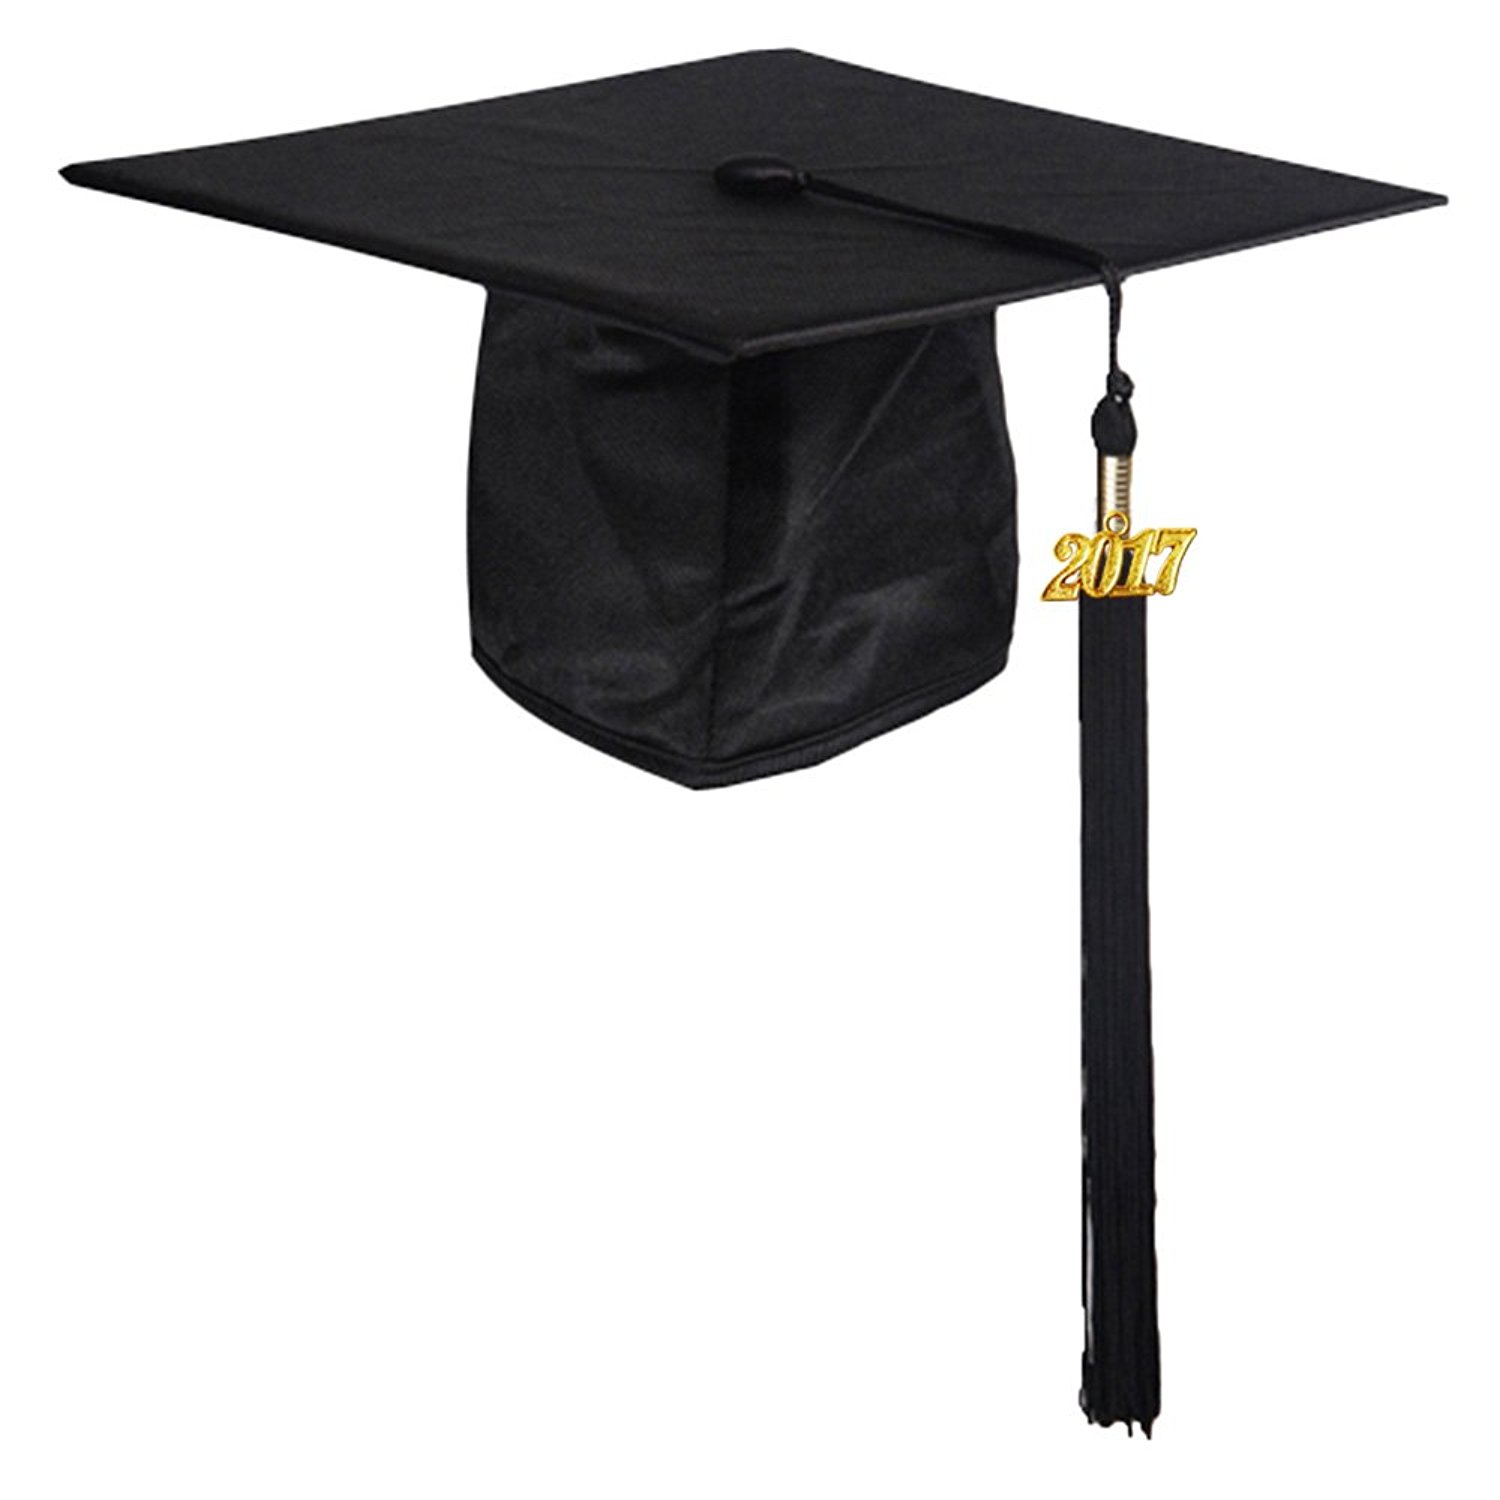 Cap And Gown Images | Free download on ClipArtMag